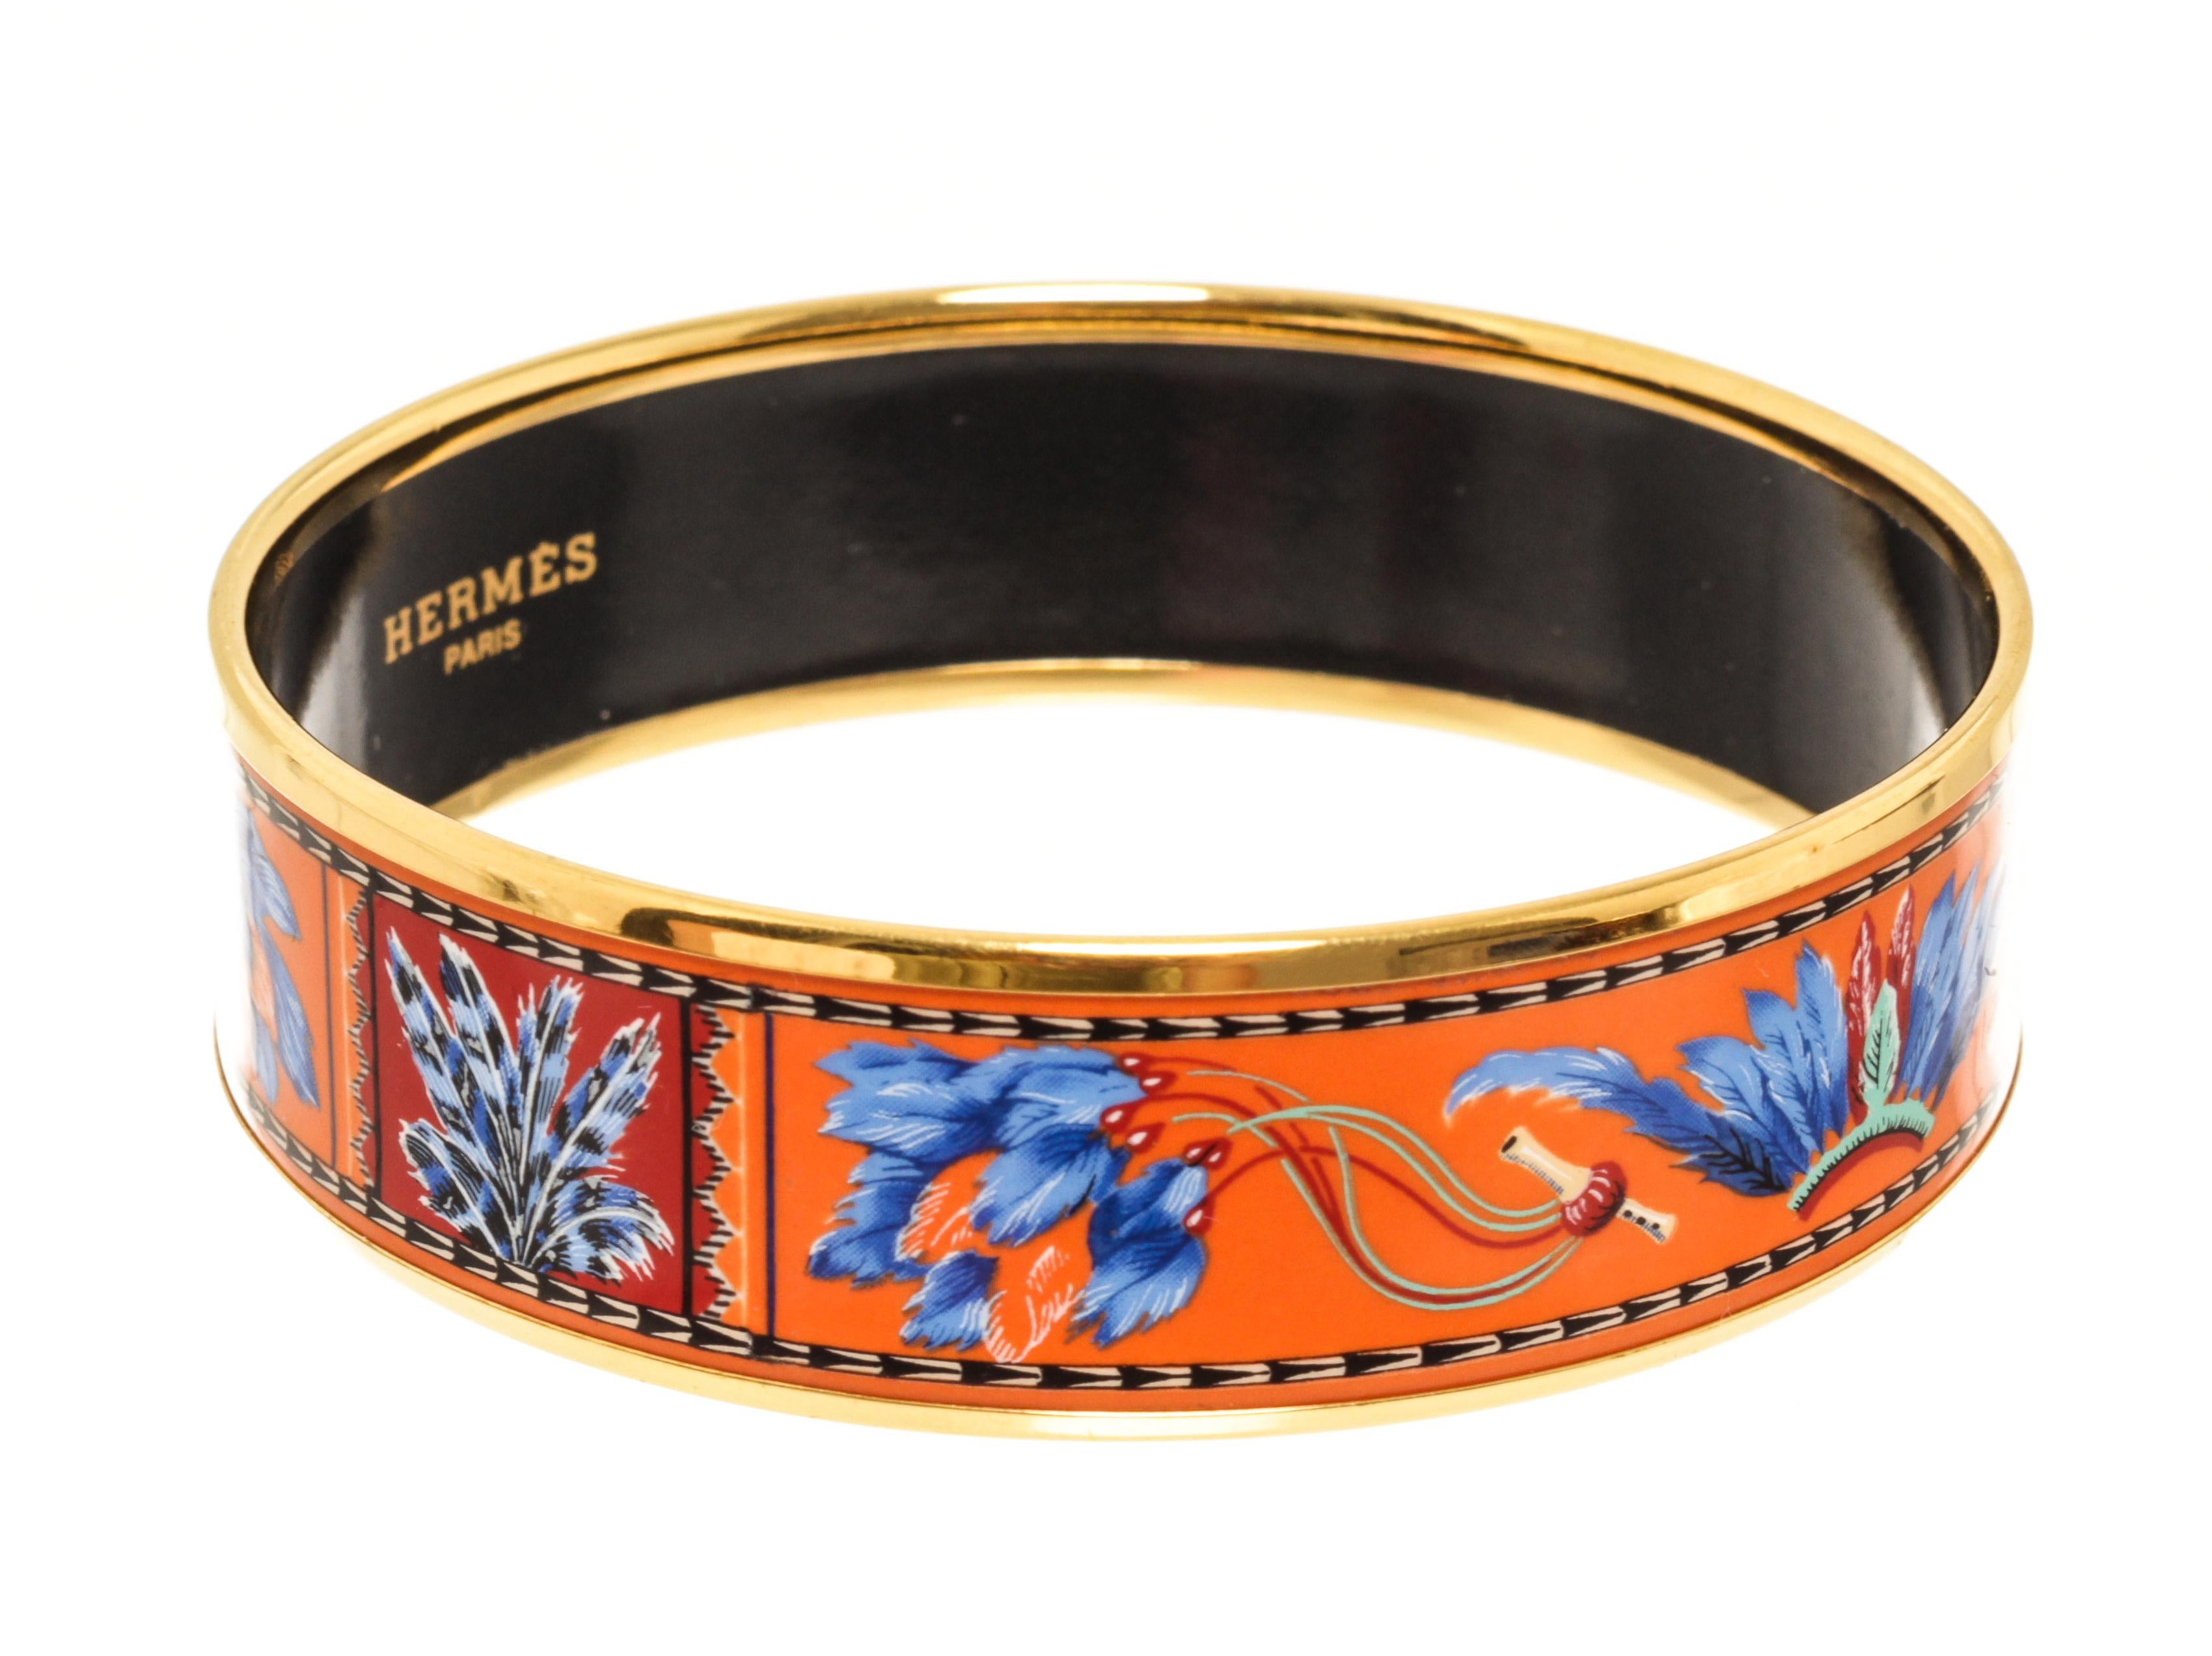 Hermes Multicolor Enamel Wide 65 Bangle Bracelet with pre-owned vintage hermes enamel bracelet with a blue, orange & turquoise printed feather design and yellow gold plated hardware.

79178MSC